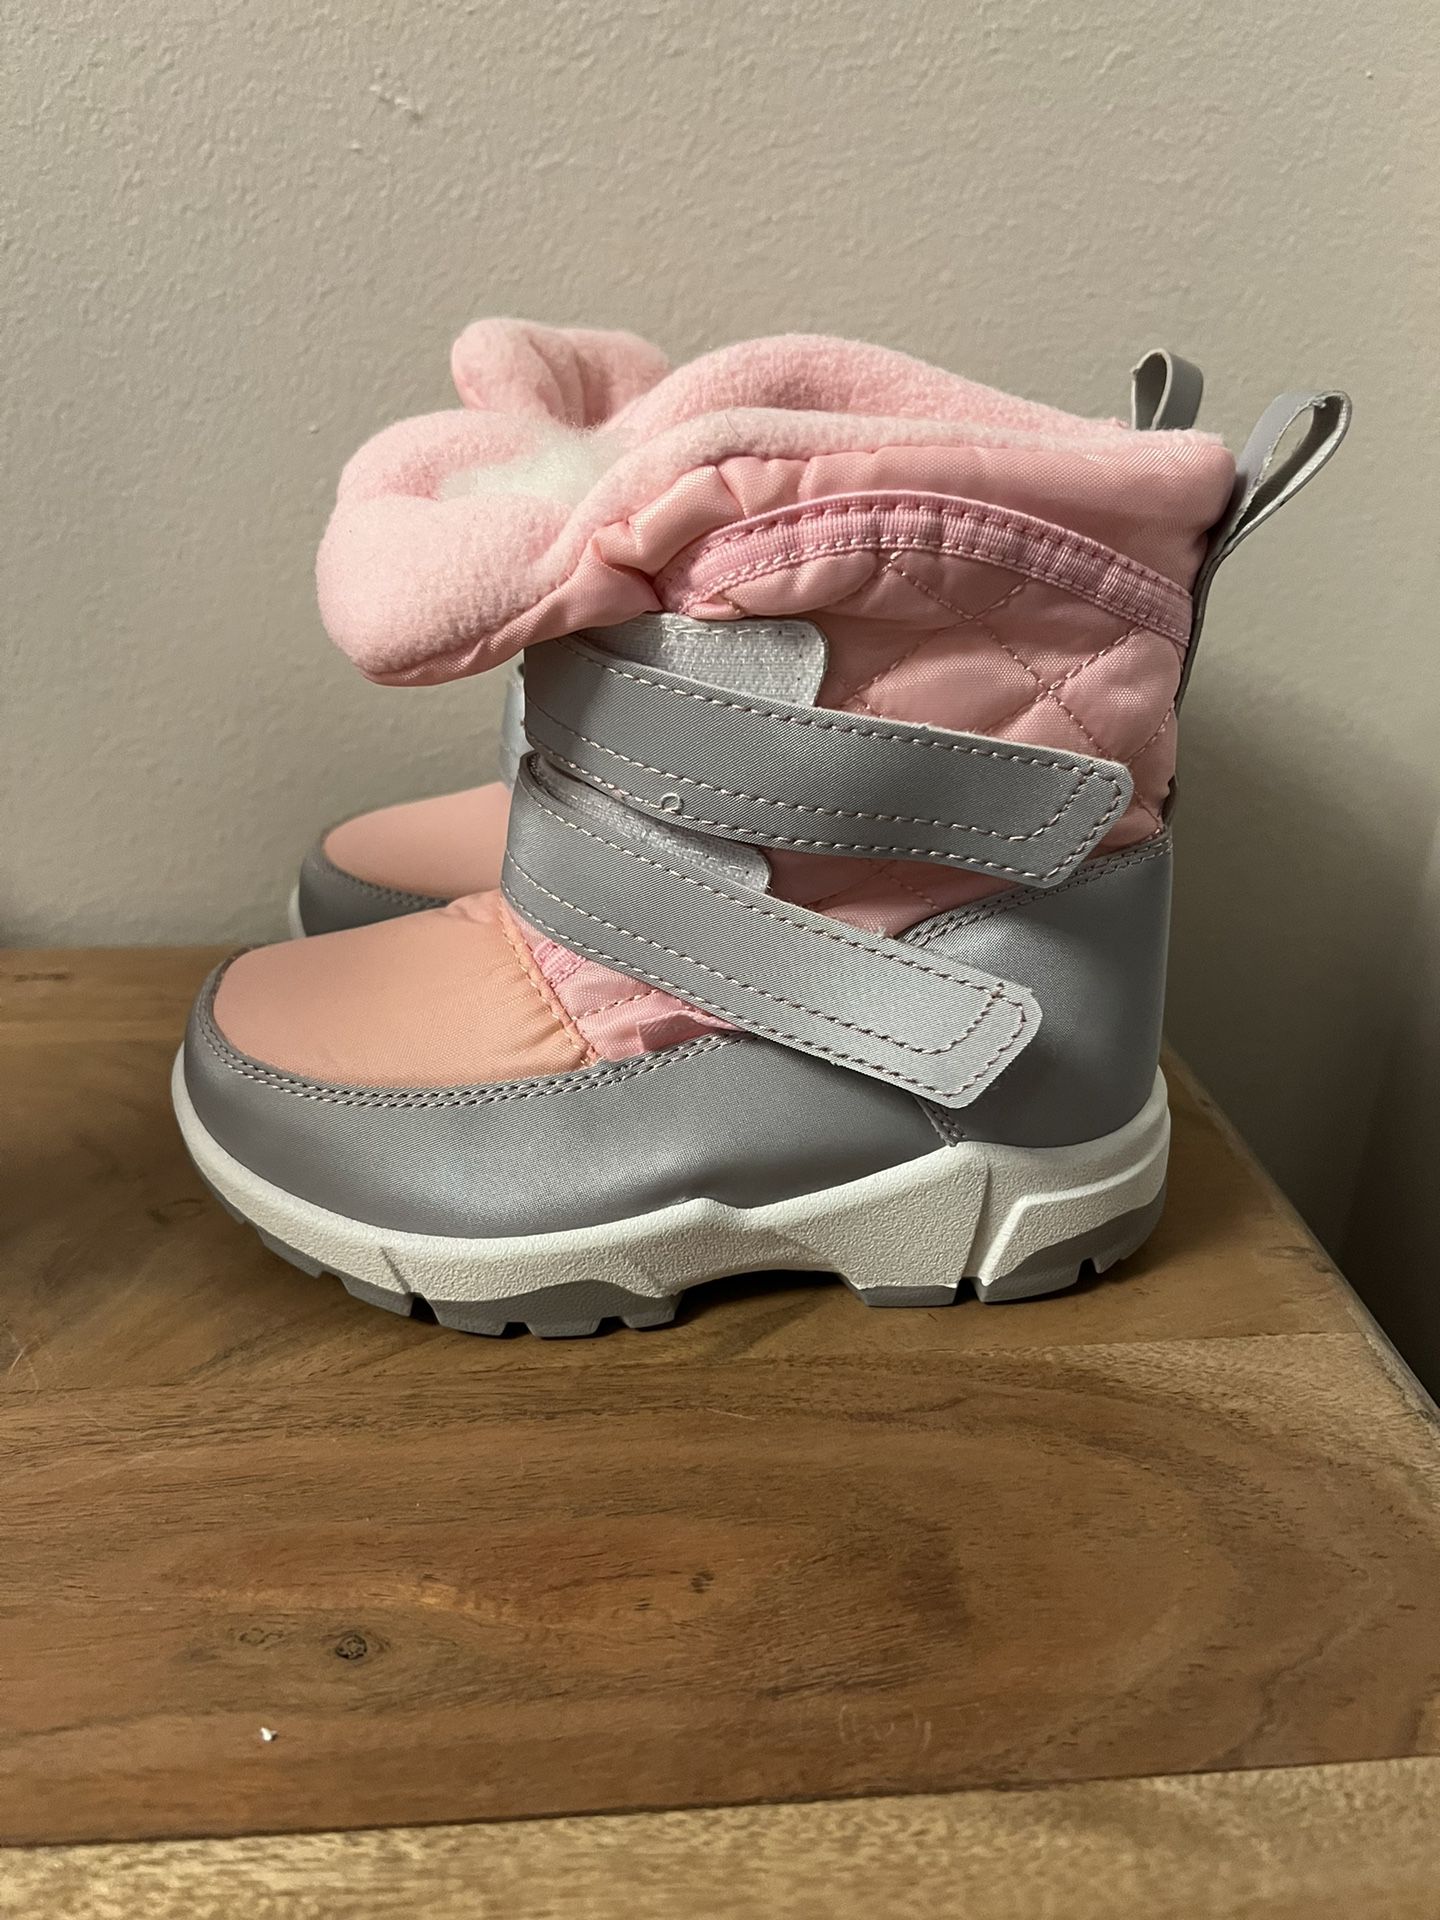 Little Girls Size 11.5 New Snow Boots